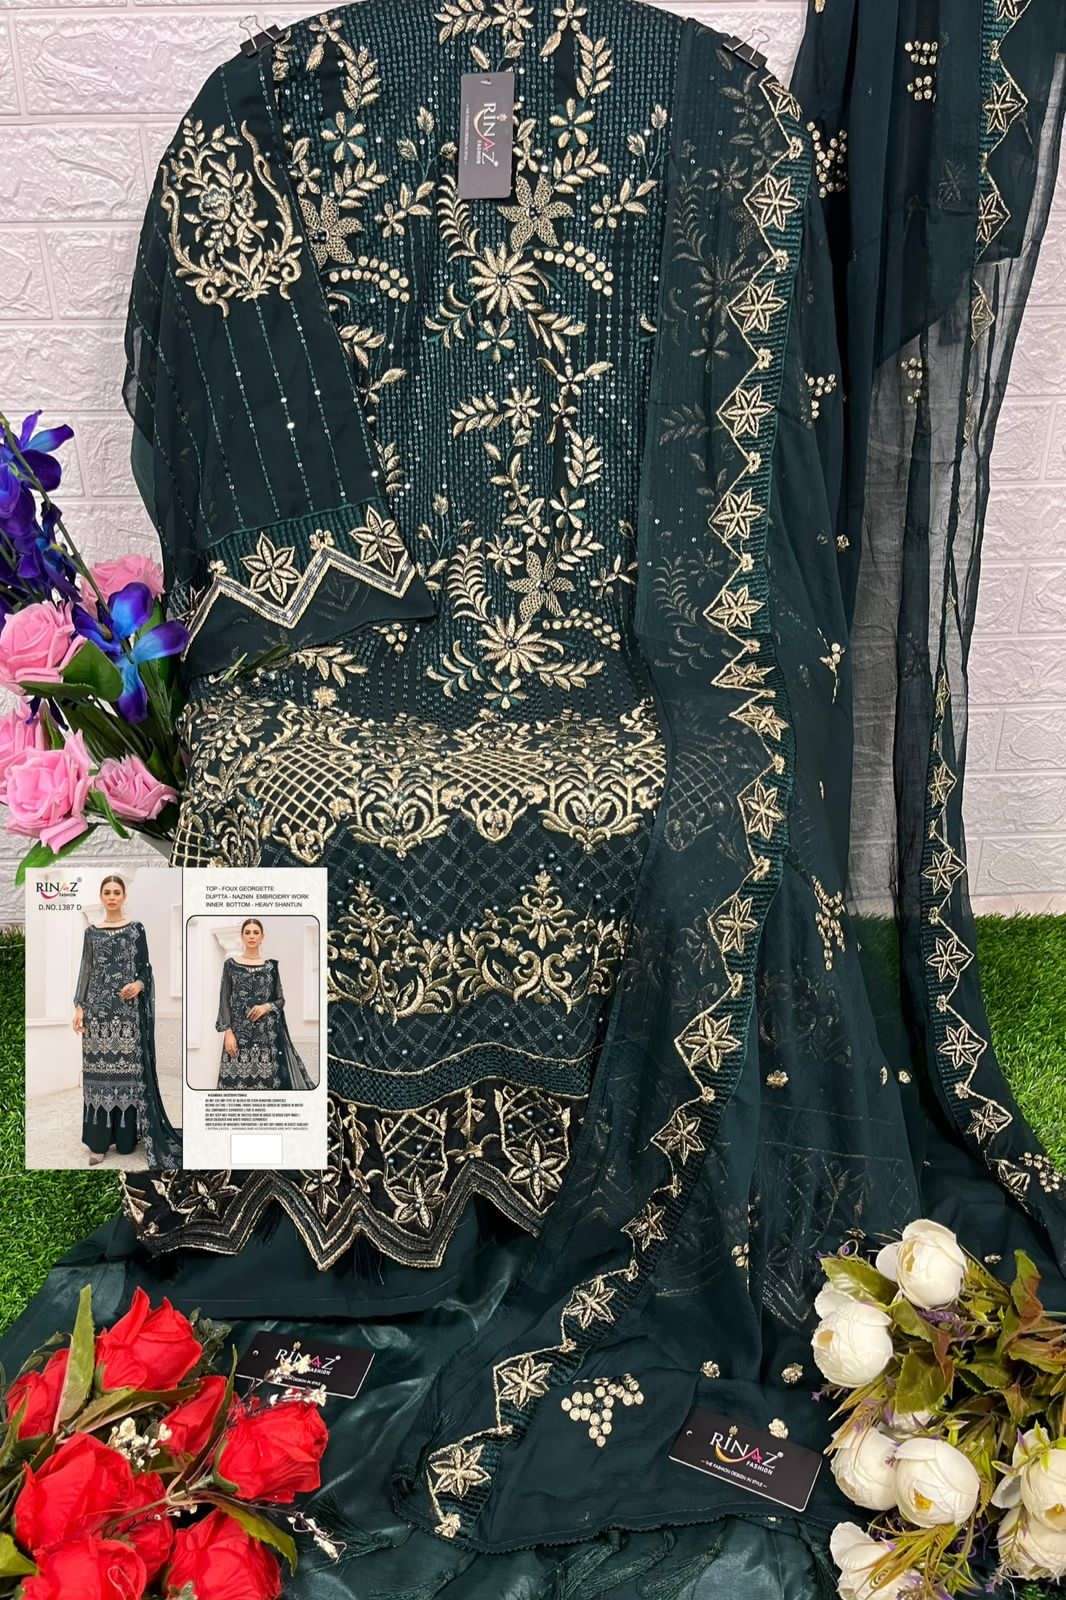 RINAZ 1387 COLOURS BY RINAZ FASHION 1387-A TO 1387-D SERIES BEAUTIFUL STYLISH PAKISTANI SUITS FANCY COLORFUL CASUAL WEAR & ETHNIC WEAR & READY TO WEAR FAUX GEORGETTE EMBROIDERY DRESSES AT WHOLESALE PRICE